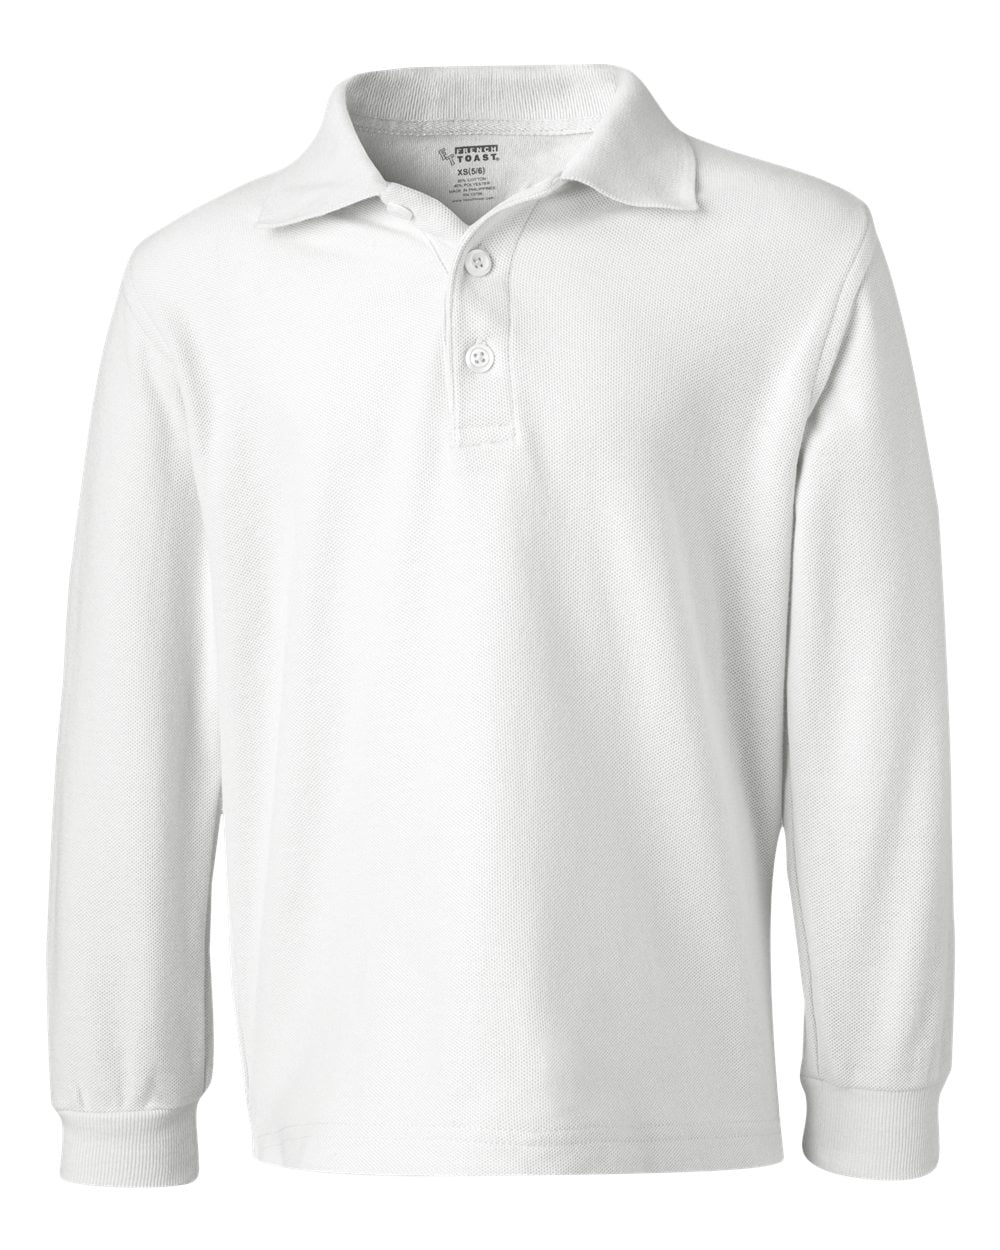 French Toast Unisex Long Sleeve Pique Knit Shirt By Size 16, White 